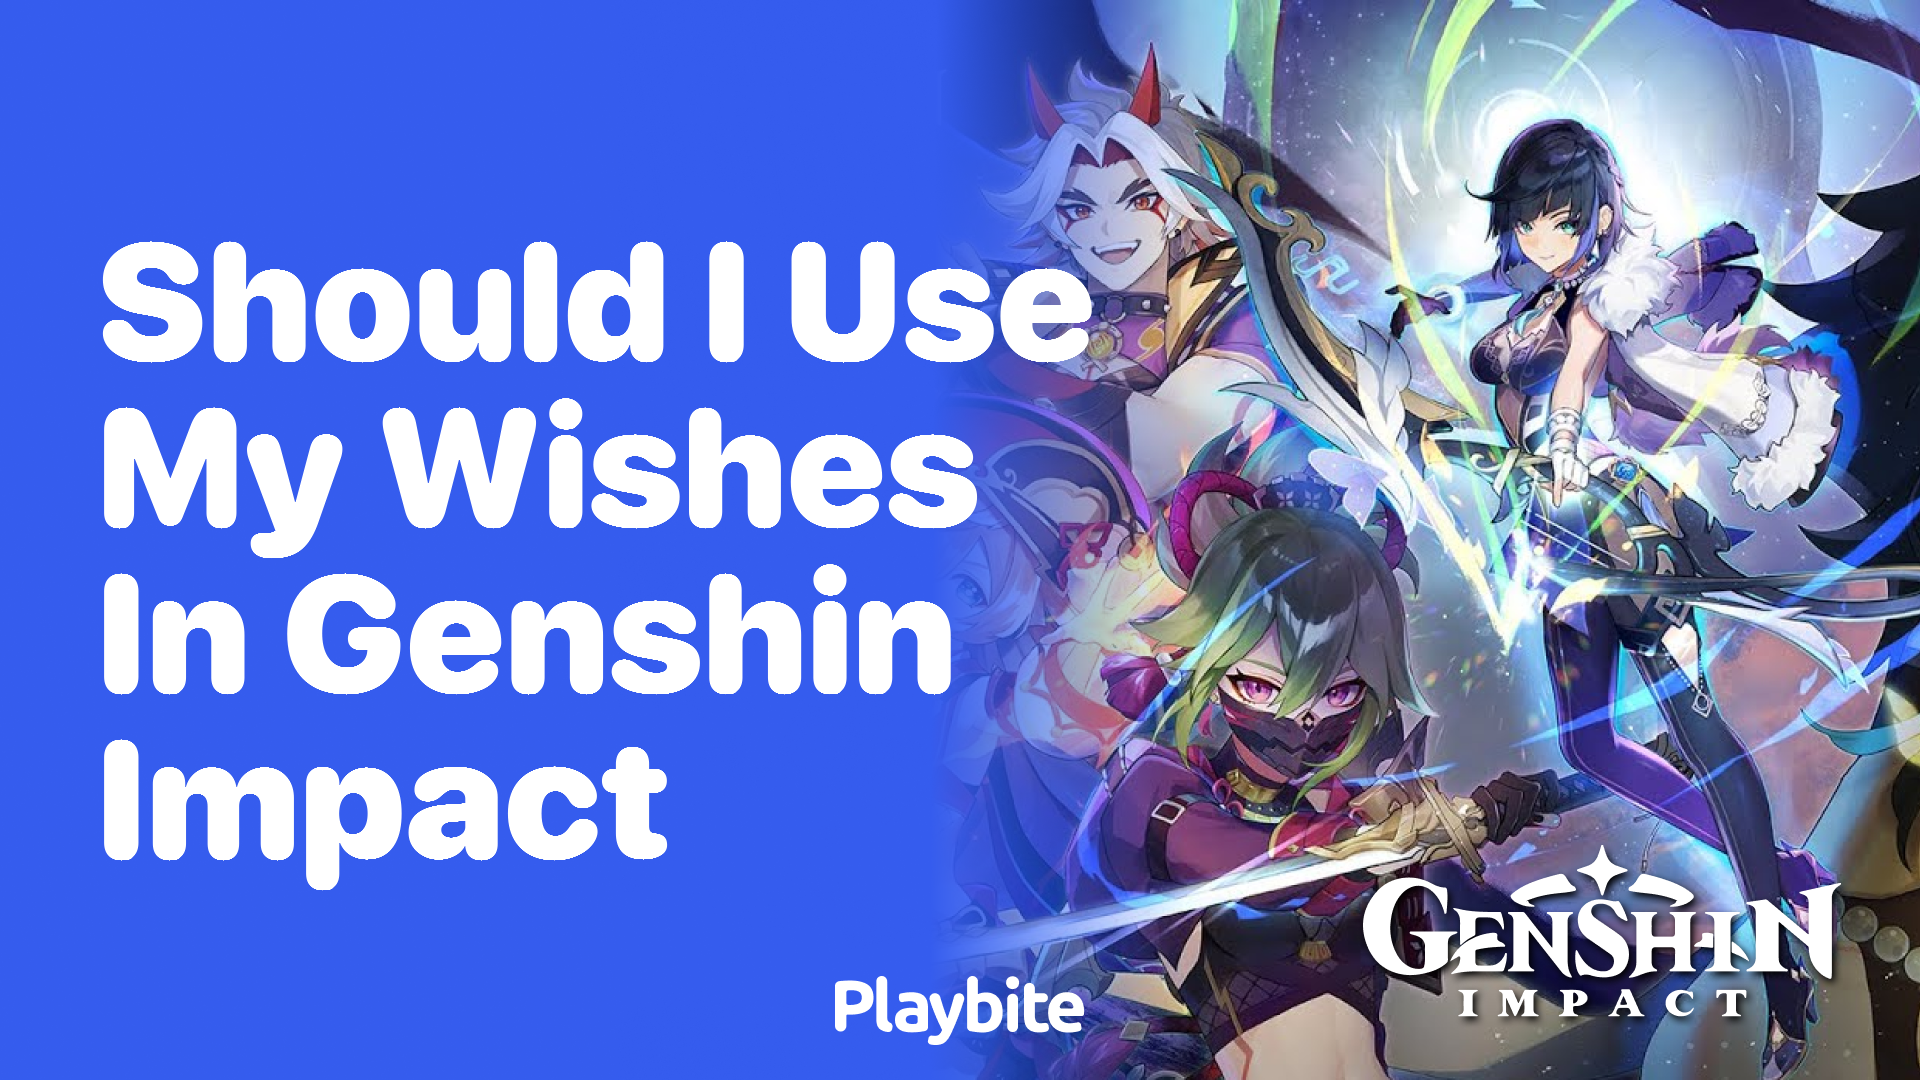 Should You Use Your Wishes in Genshin Impact?